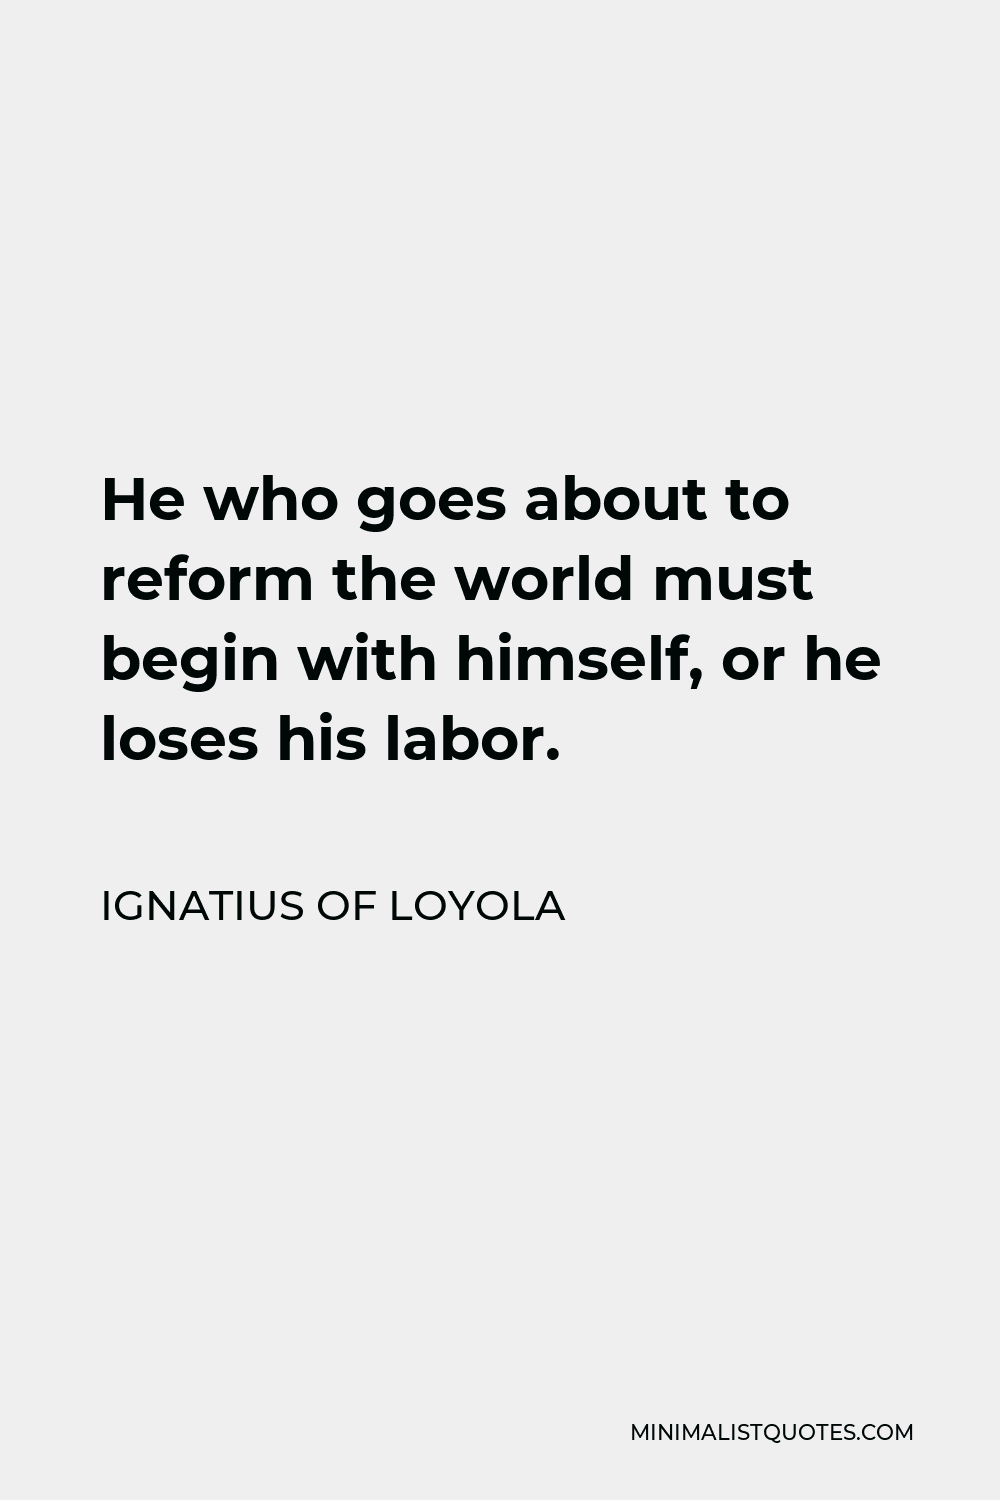 Ignatius of Loyola Quote - He who goes about to reform the world must begin with himself, or he loses his labor.